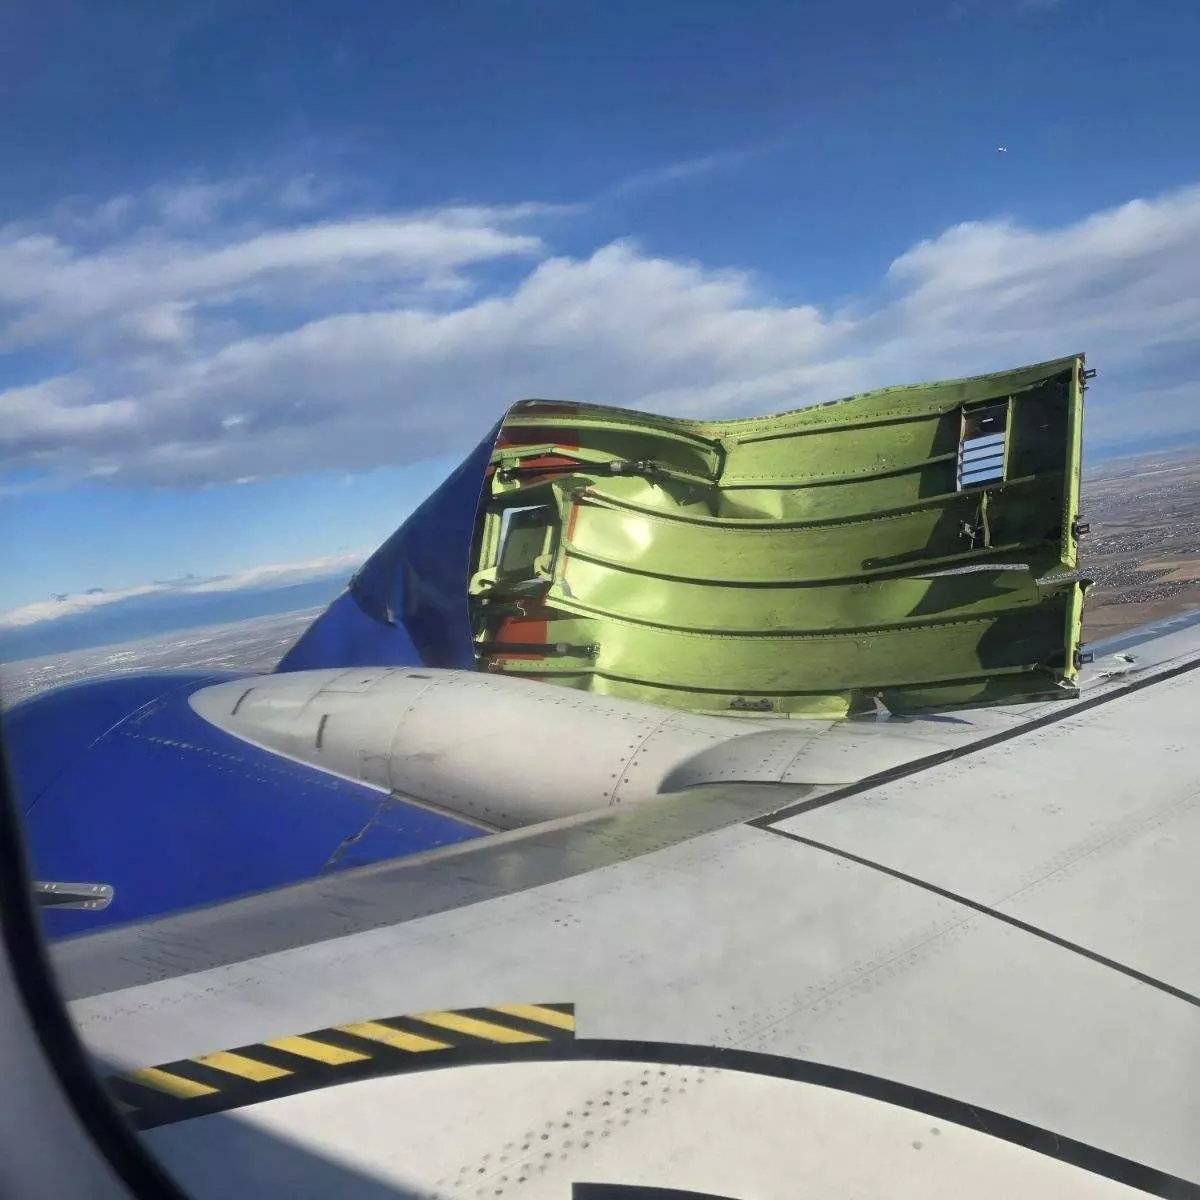 Boeing engine cover falls off during take-off, aircraft makes emergency landing